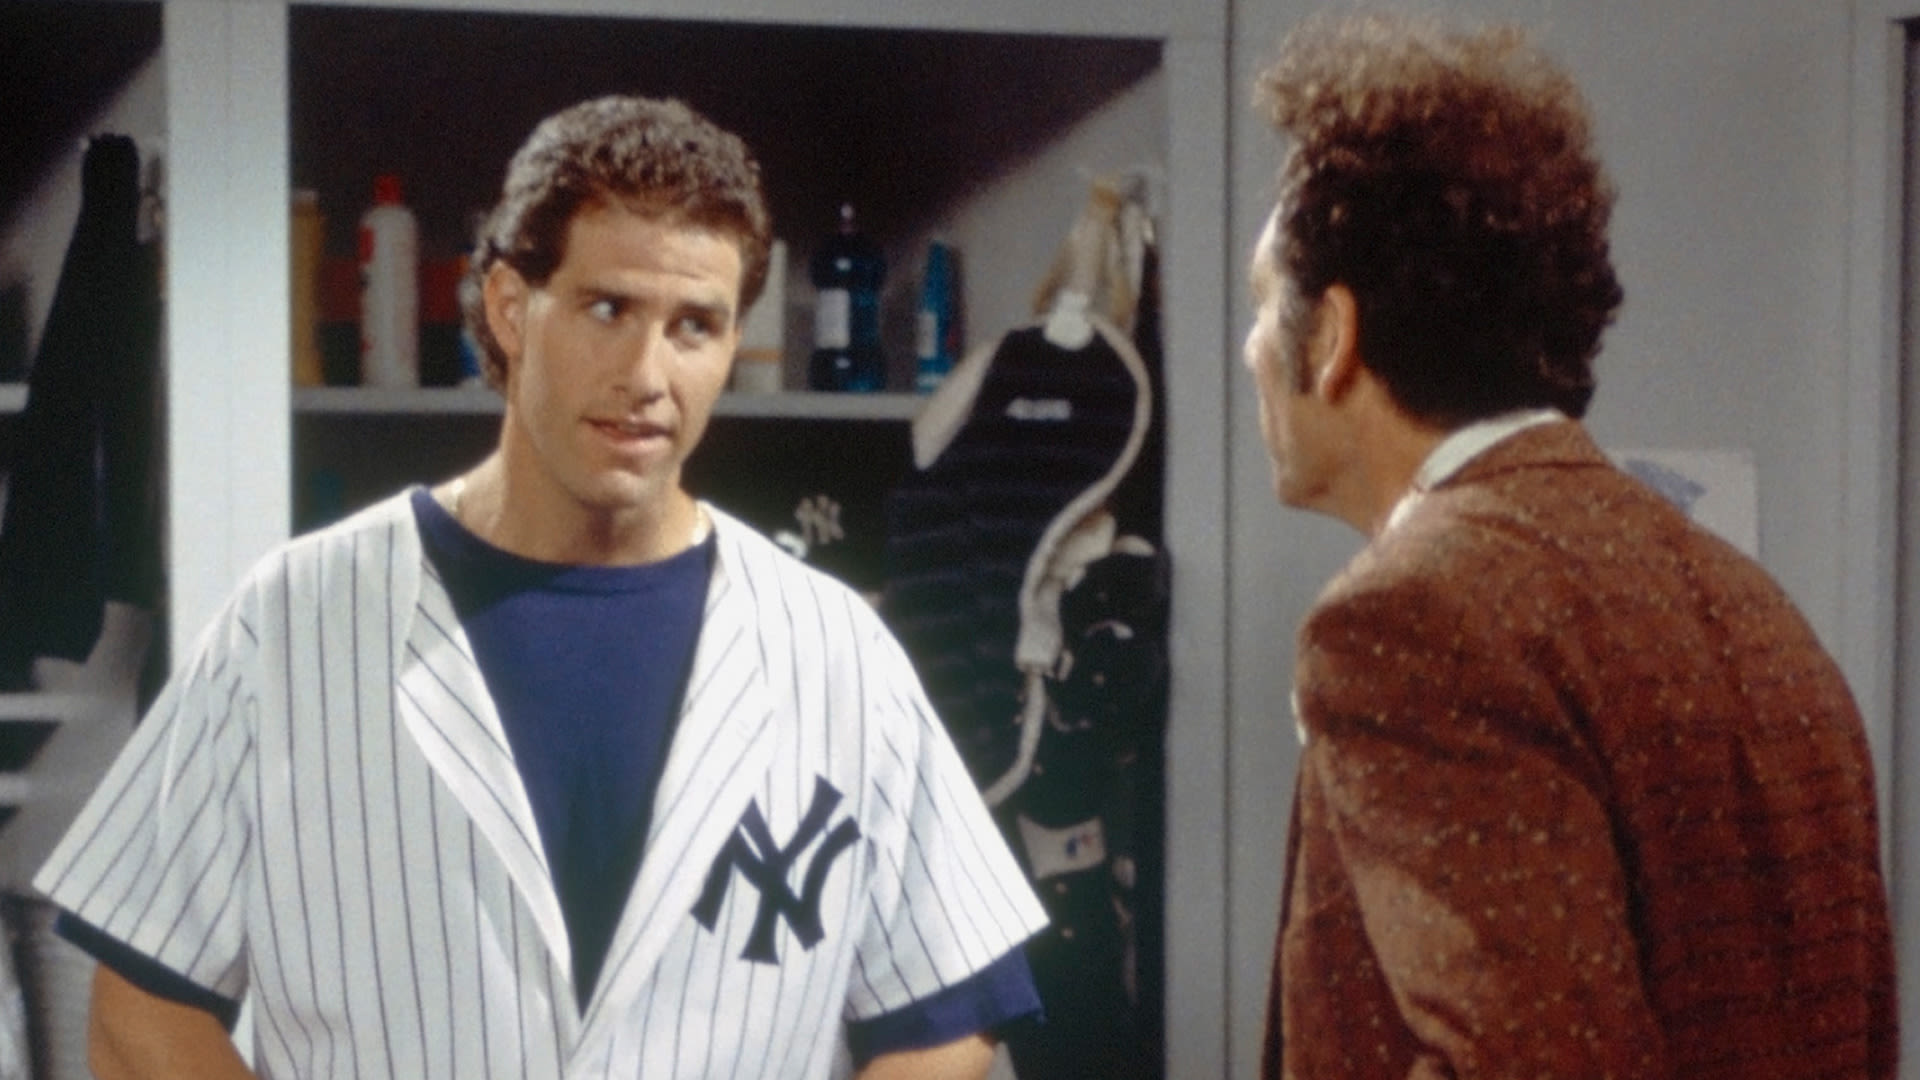 I'm a Yankees icon and appeared in hit TV show - I still get residual checks